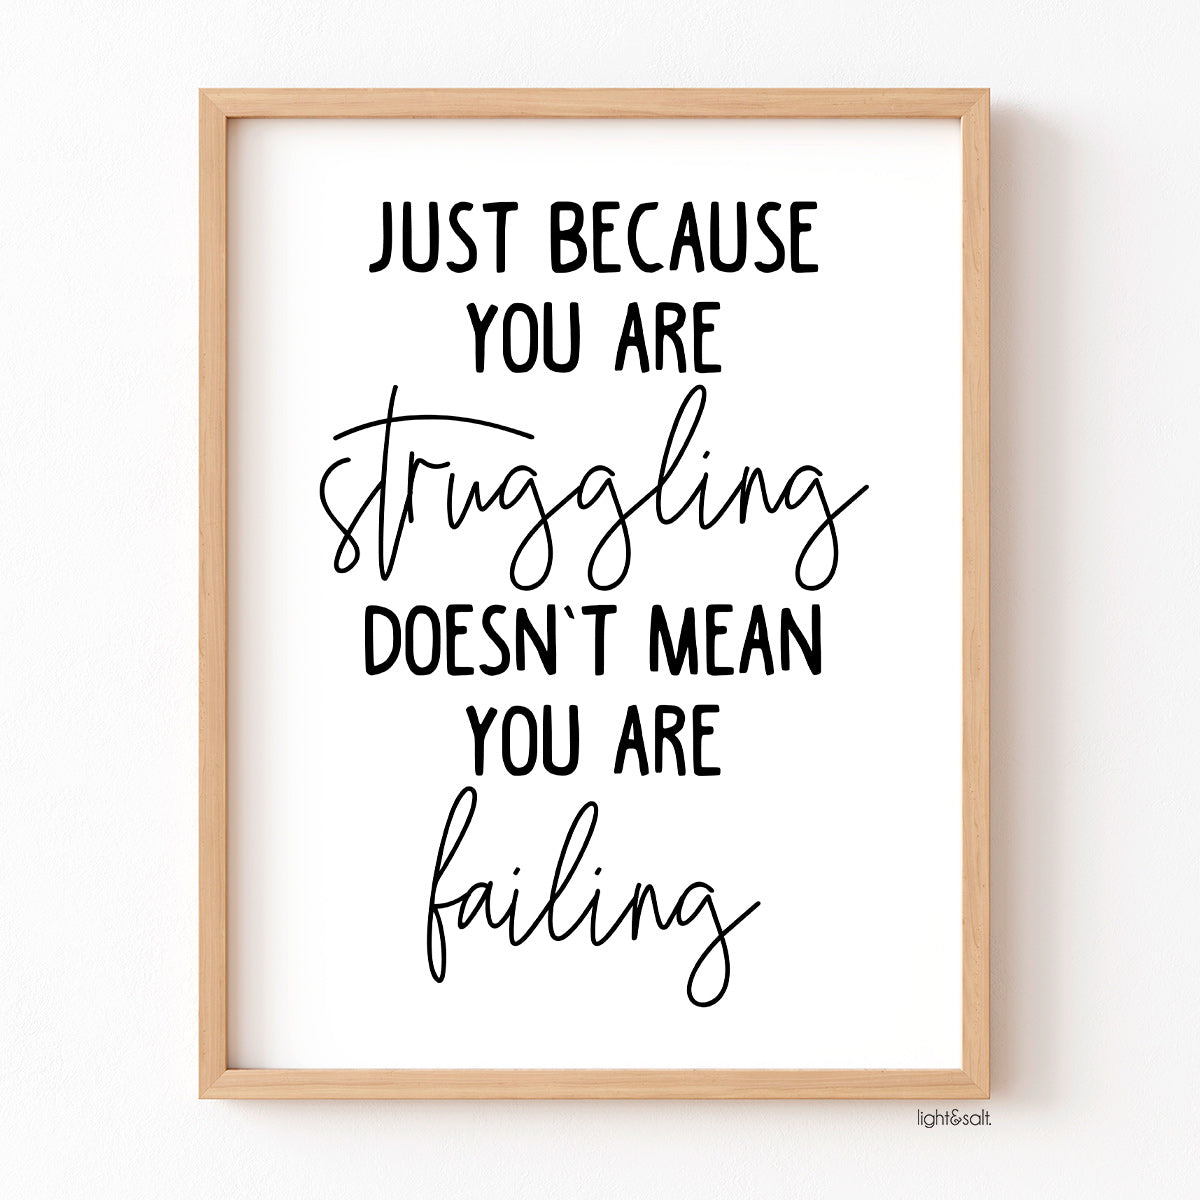 Just because you are struggling doesn't mean you are failing poster